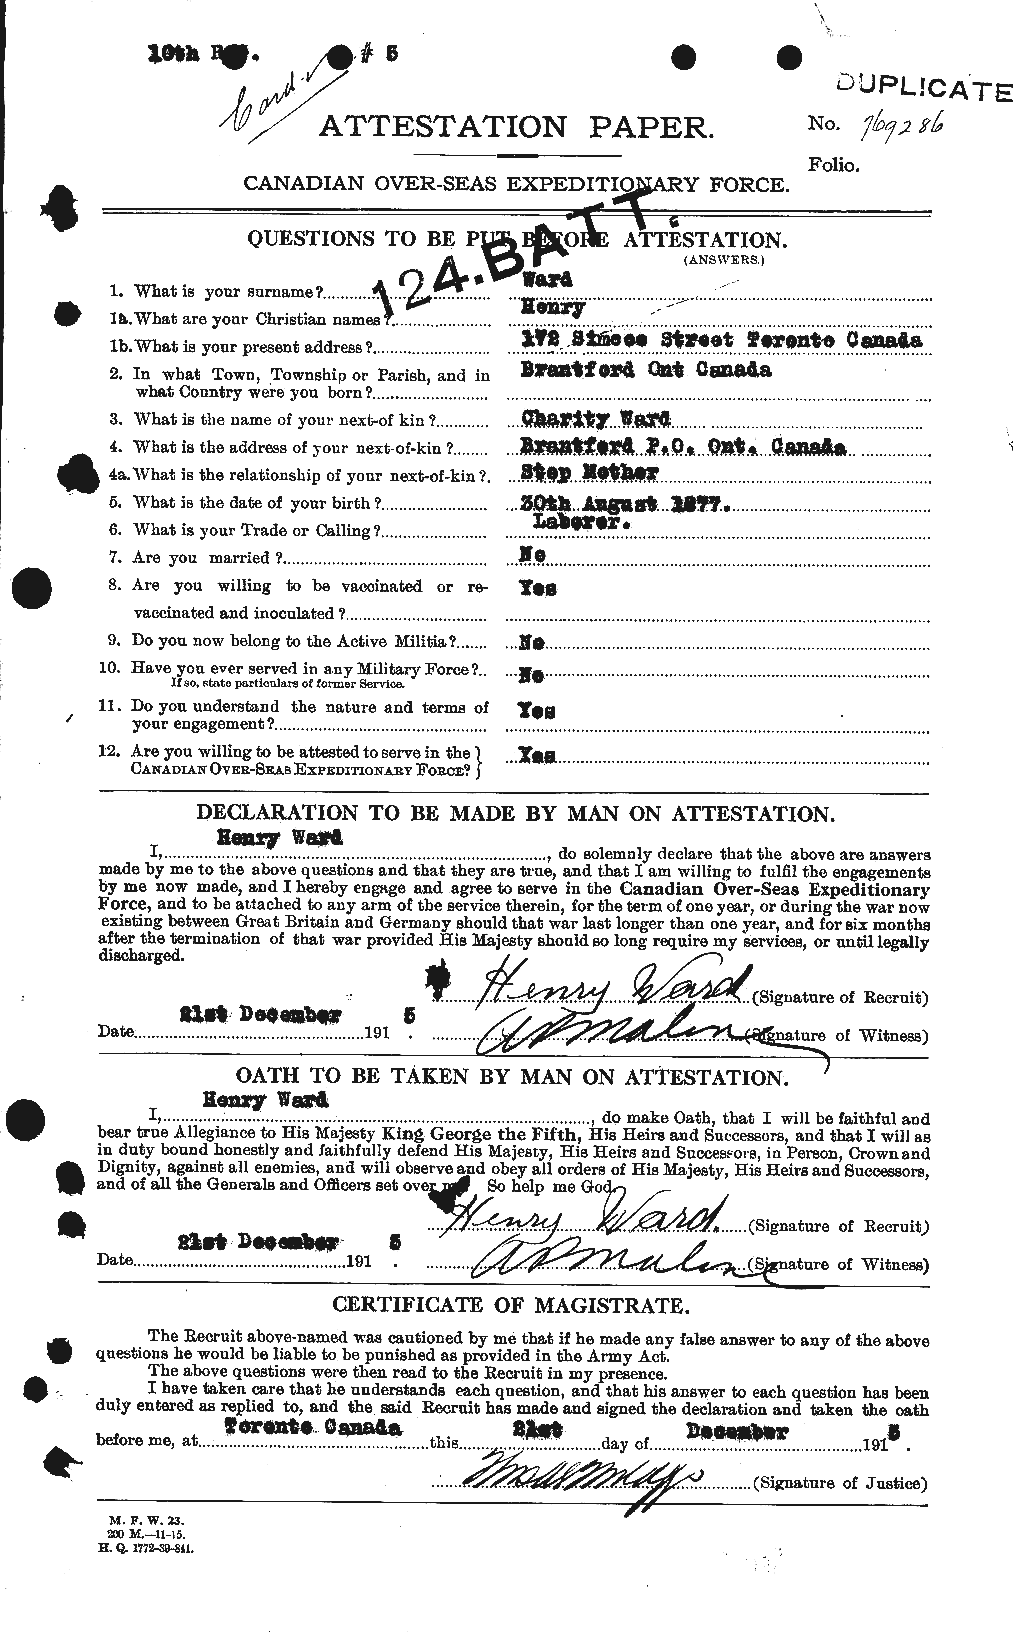 Personnel Records of the First World War - CEF 657820a